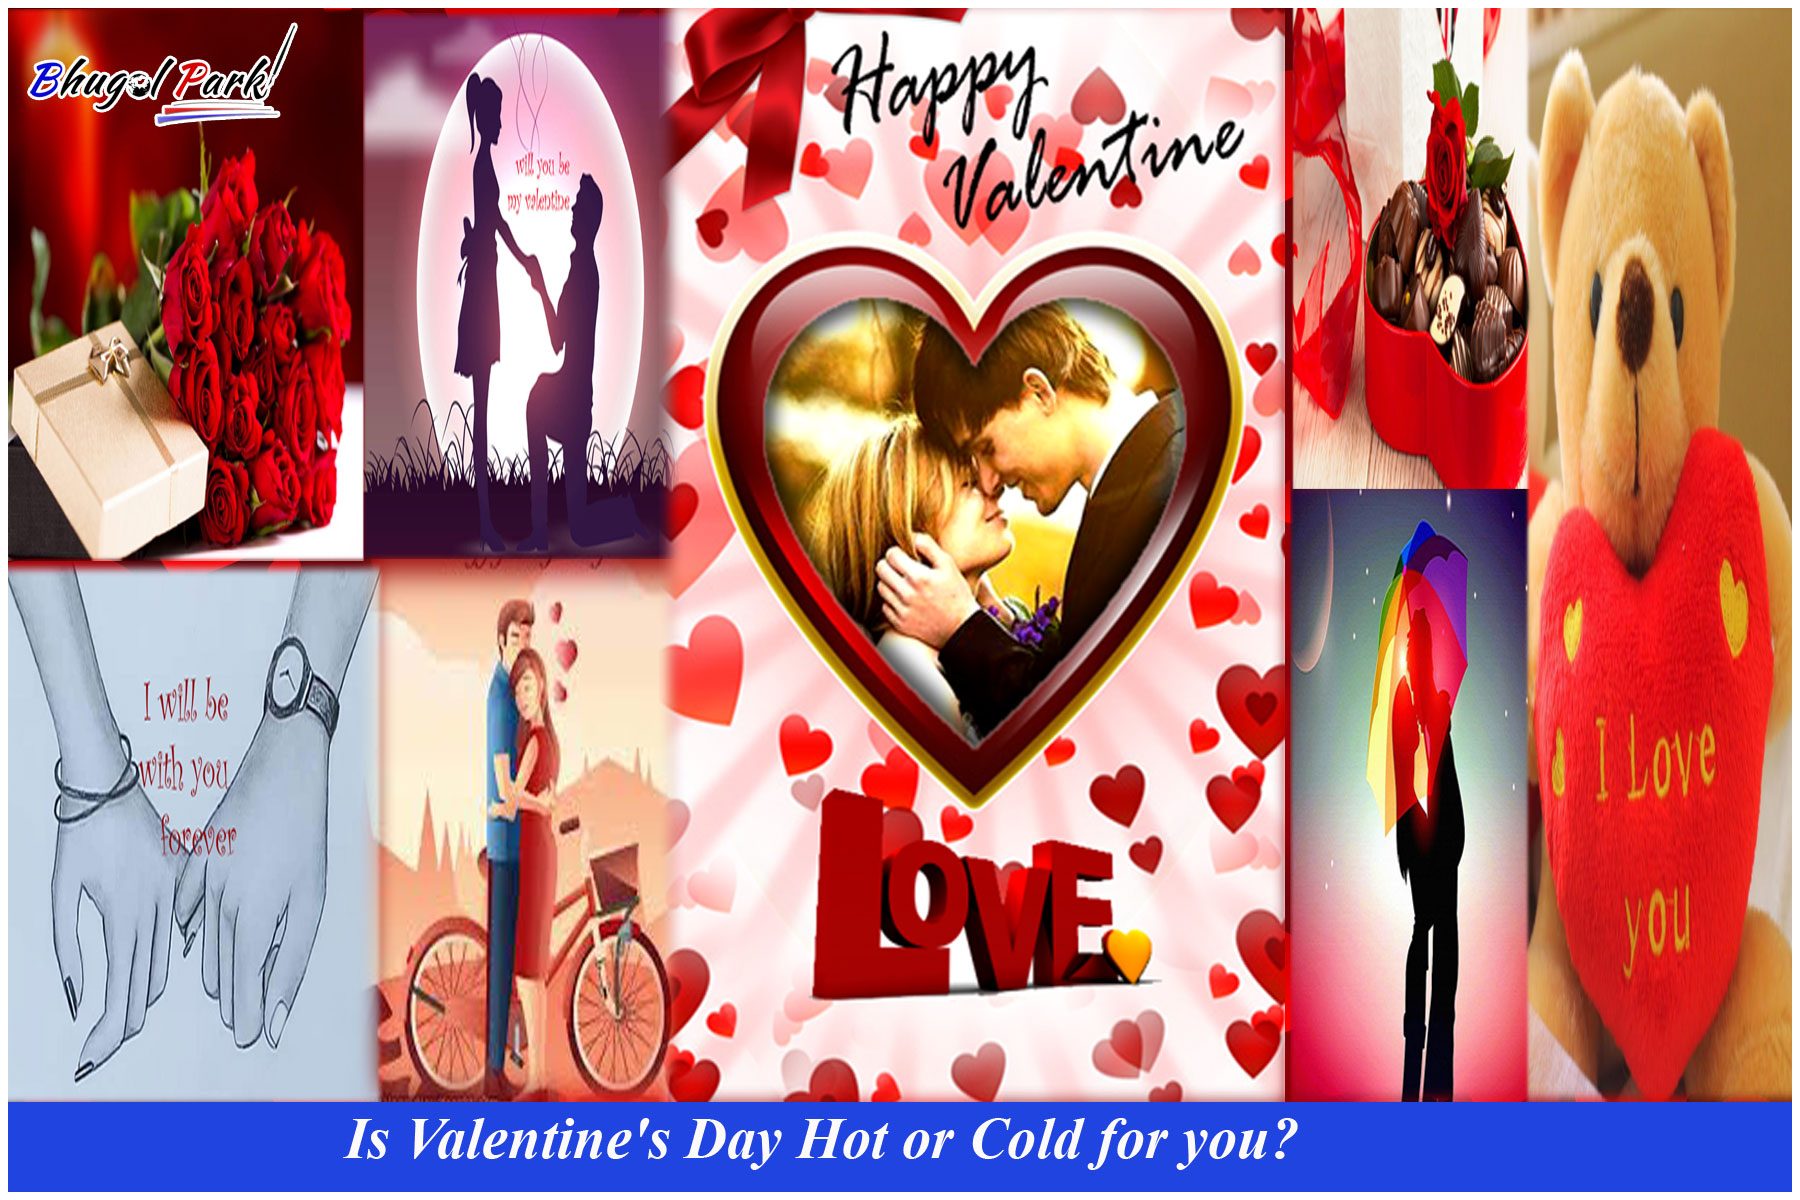 Is Valentine's Day Hot or Cold for you , the public opinion about it is as follows.